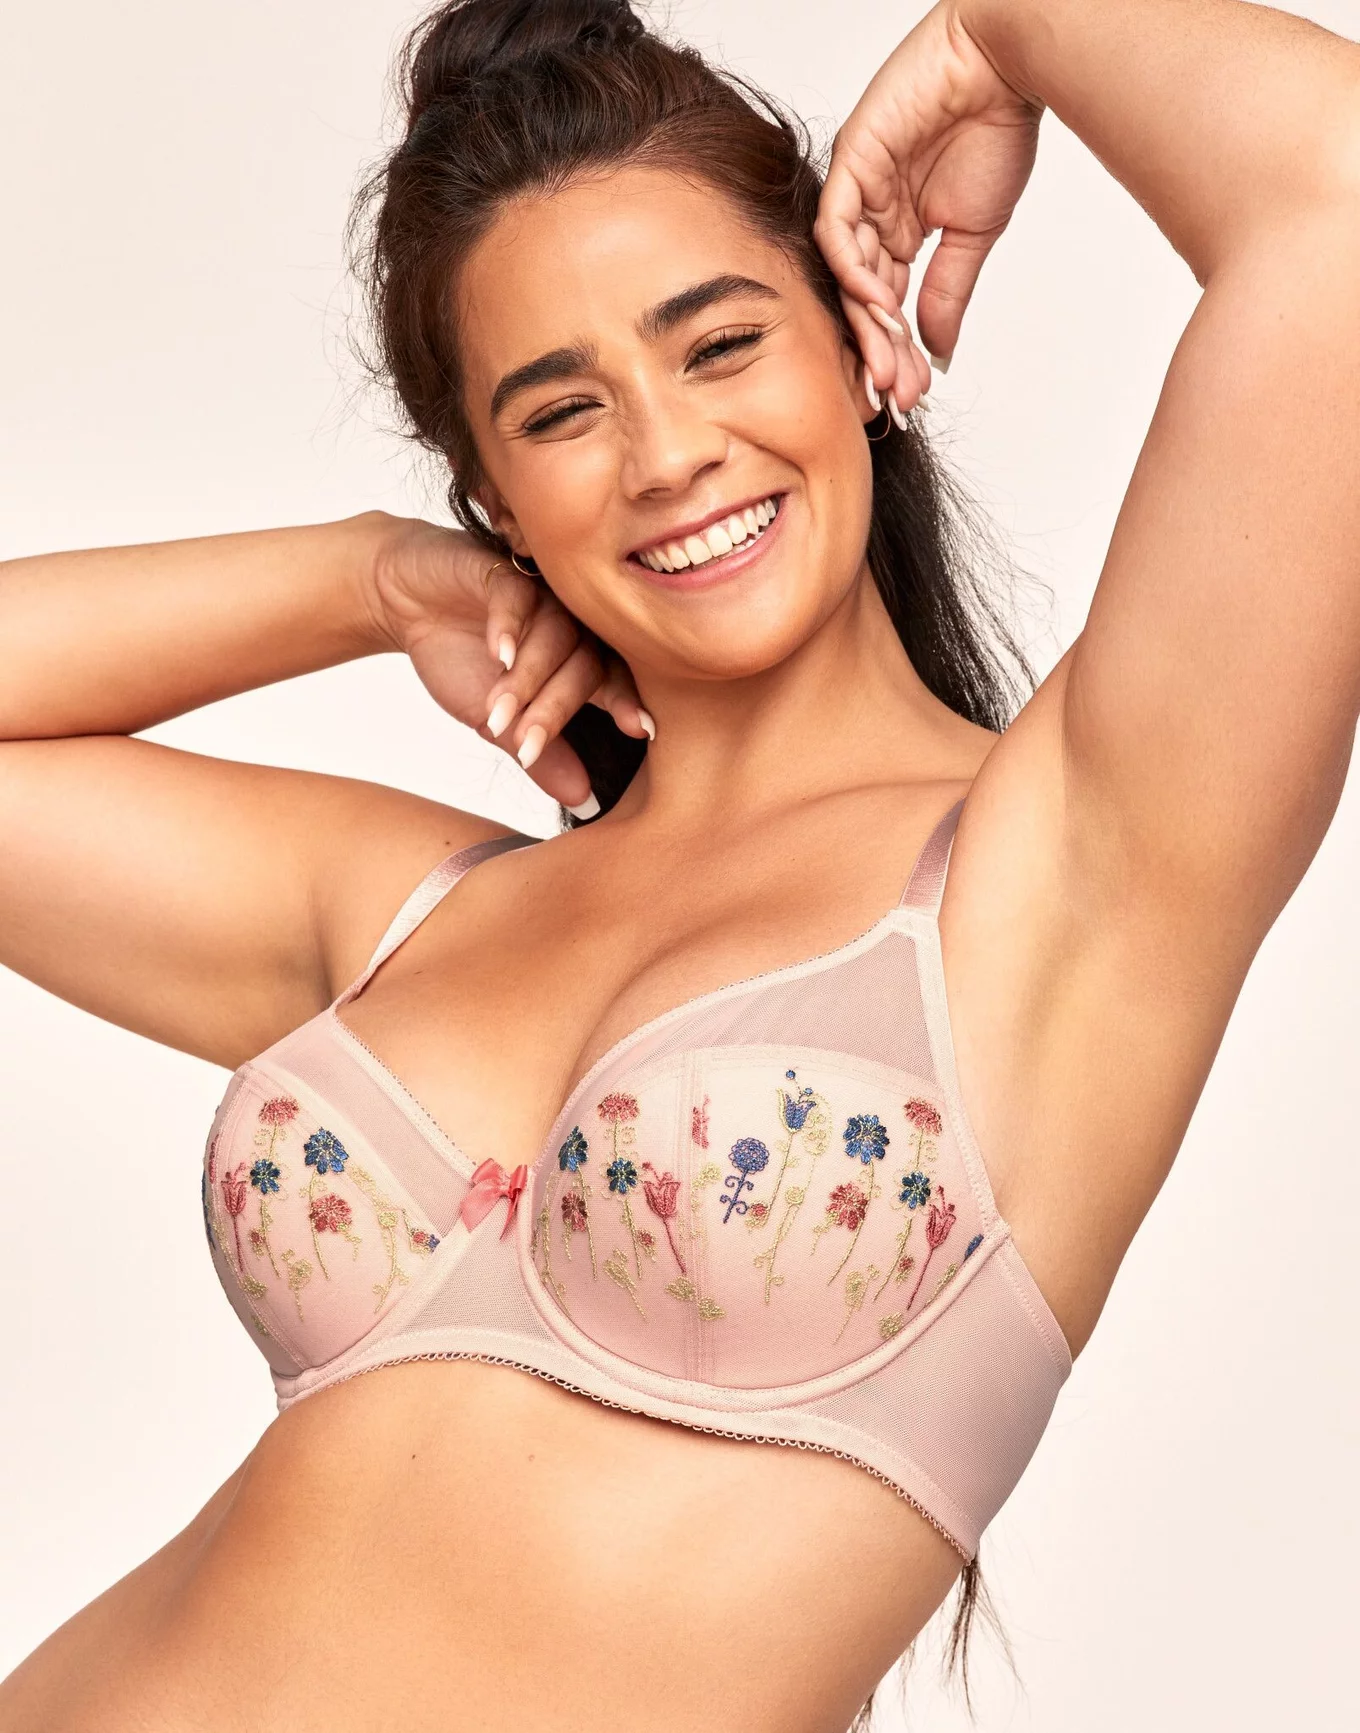 Buy AMOUR CONTOUR BRA online at Intimo